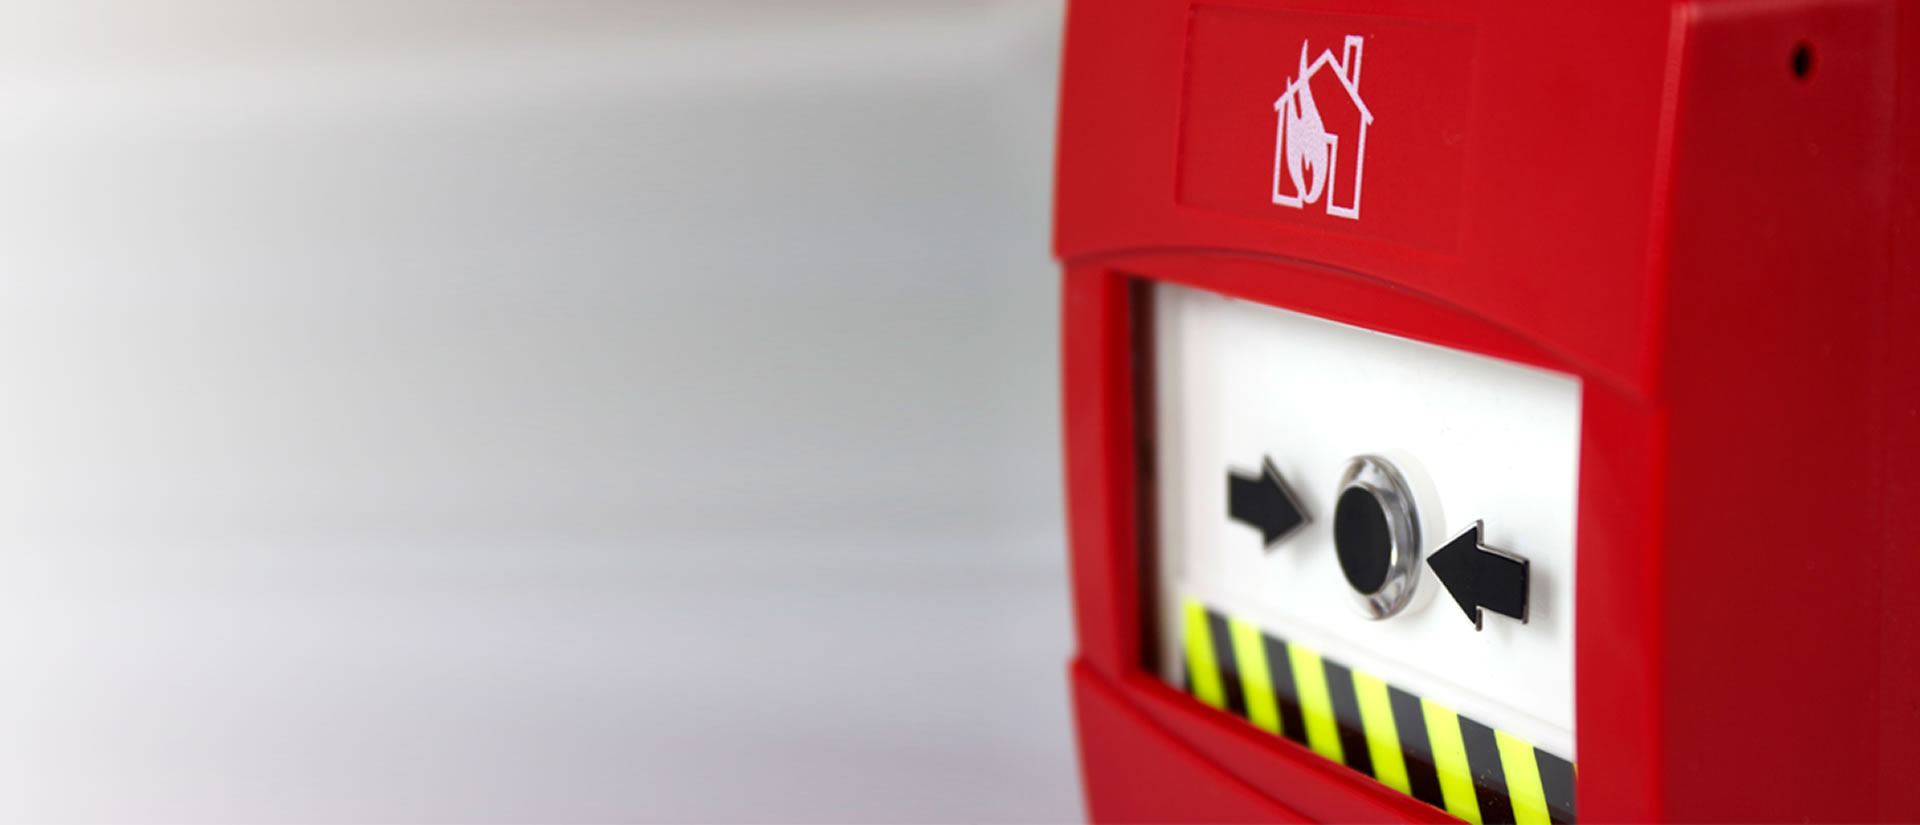 Fire Alarm Systems from JMH Technology